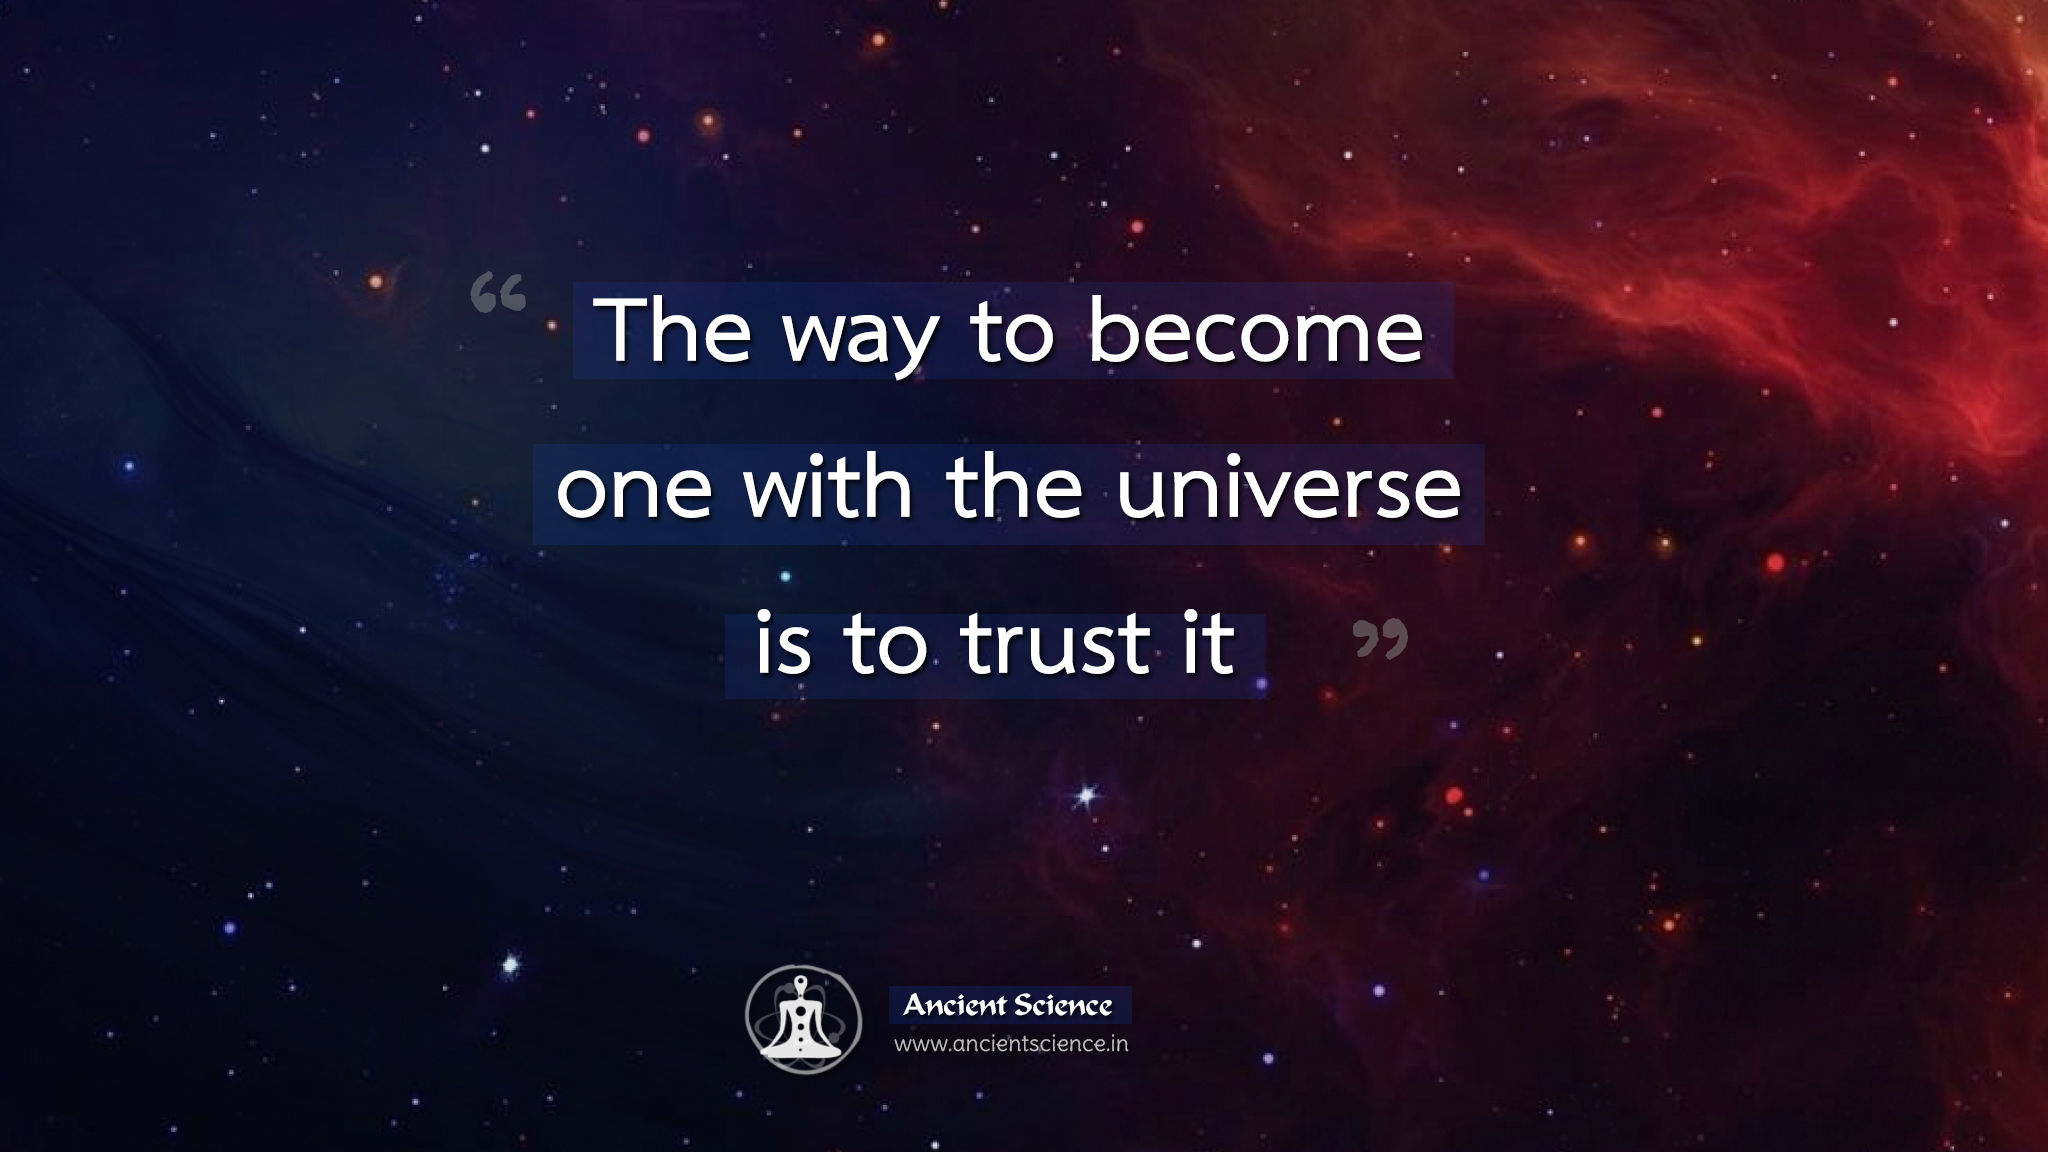 The way to become one with the universe is to trust it